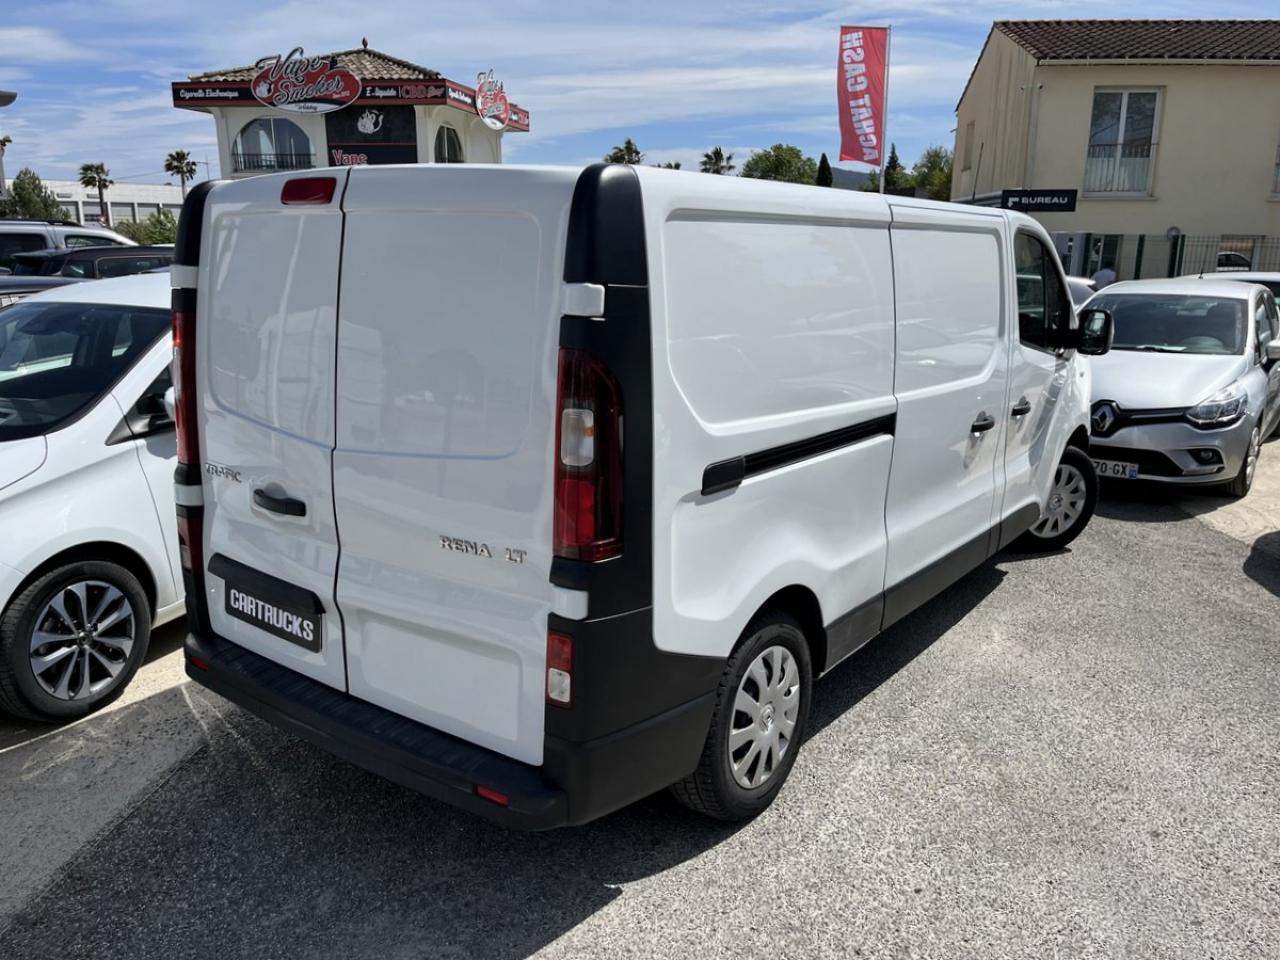 CARTRUCKS - RENAULT-TRAFIC-Trafic L2H1 1300 Kg 2.0 dCi - 120 - S&S III  FOURGON Fourgon Grand Confort L2H1 PHASE 2